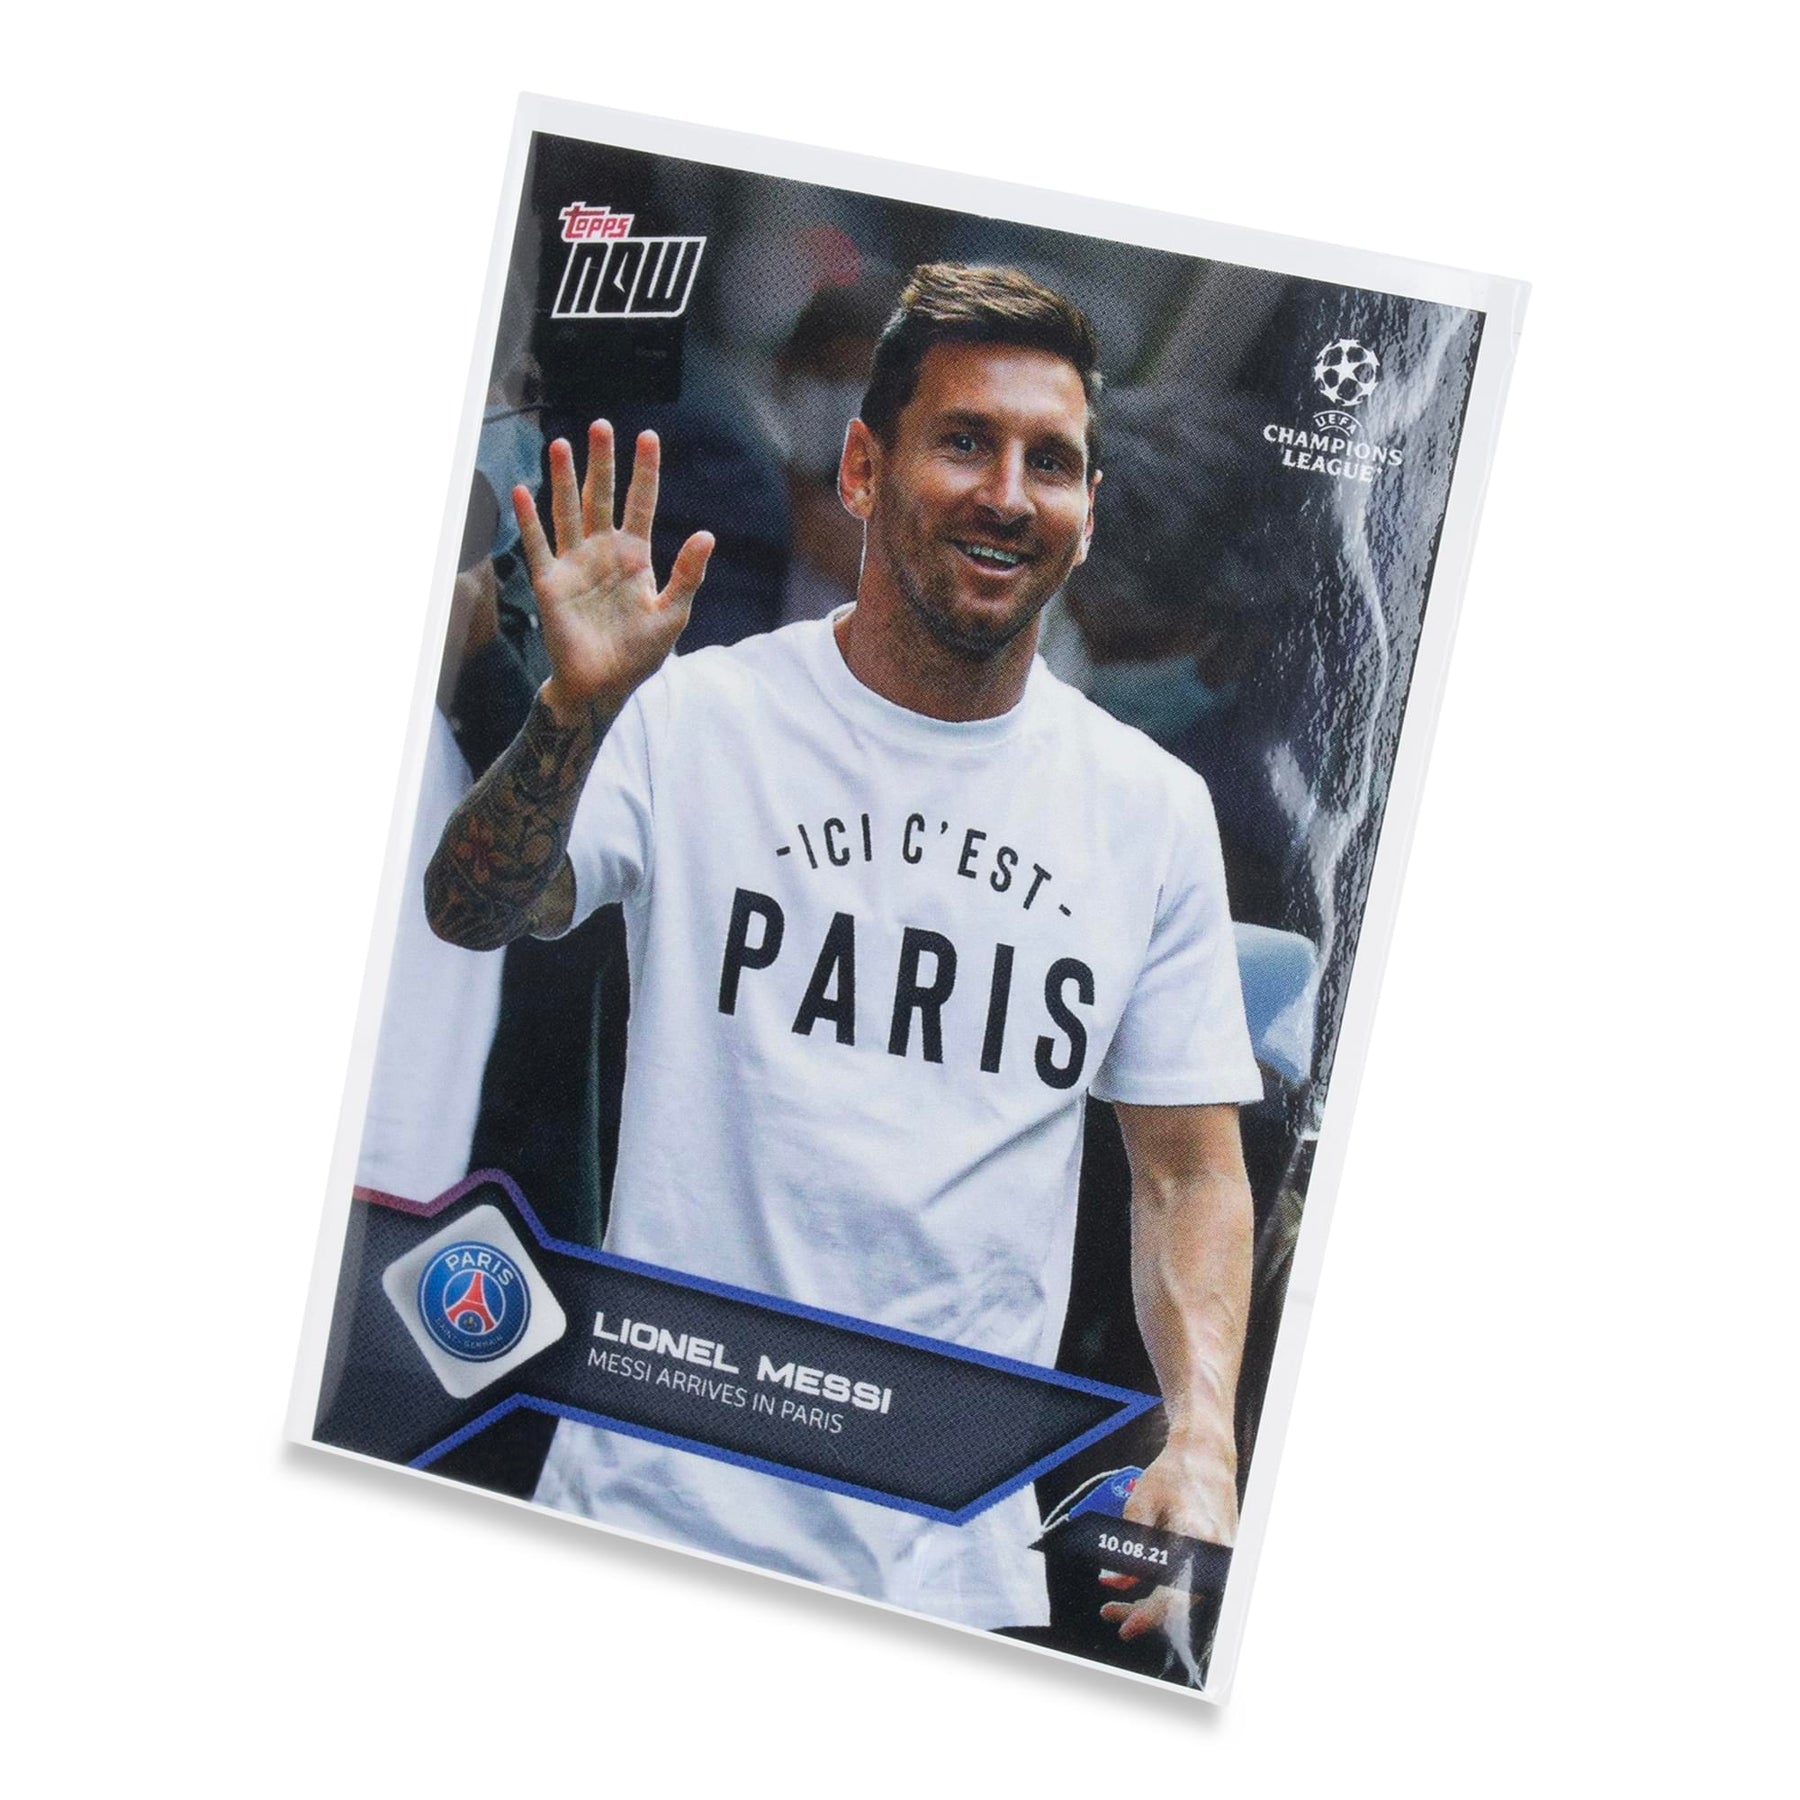 UCL TOPPS NOW Card #11 | Messi Arrives in Paris